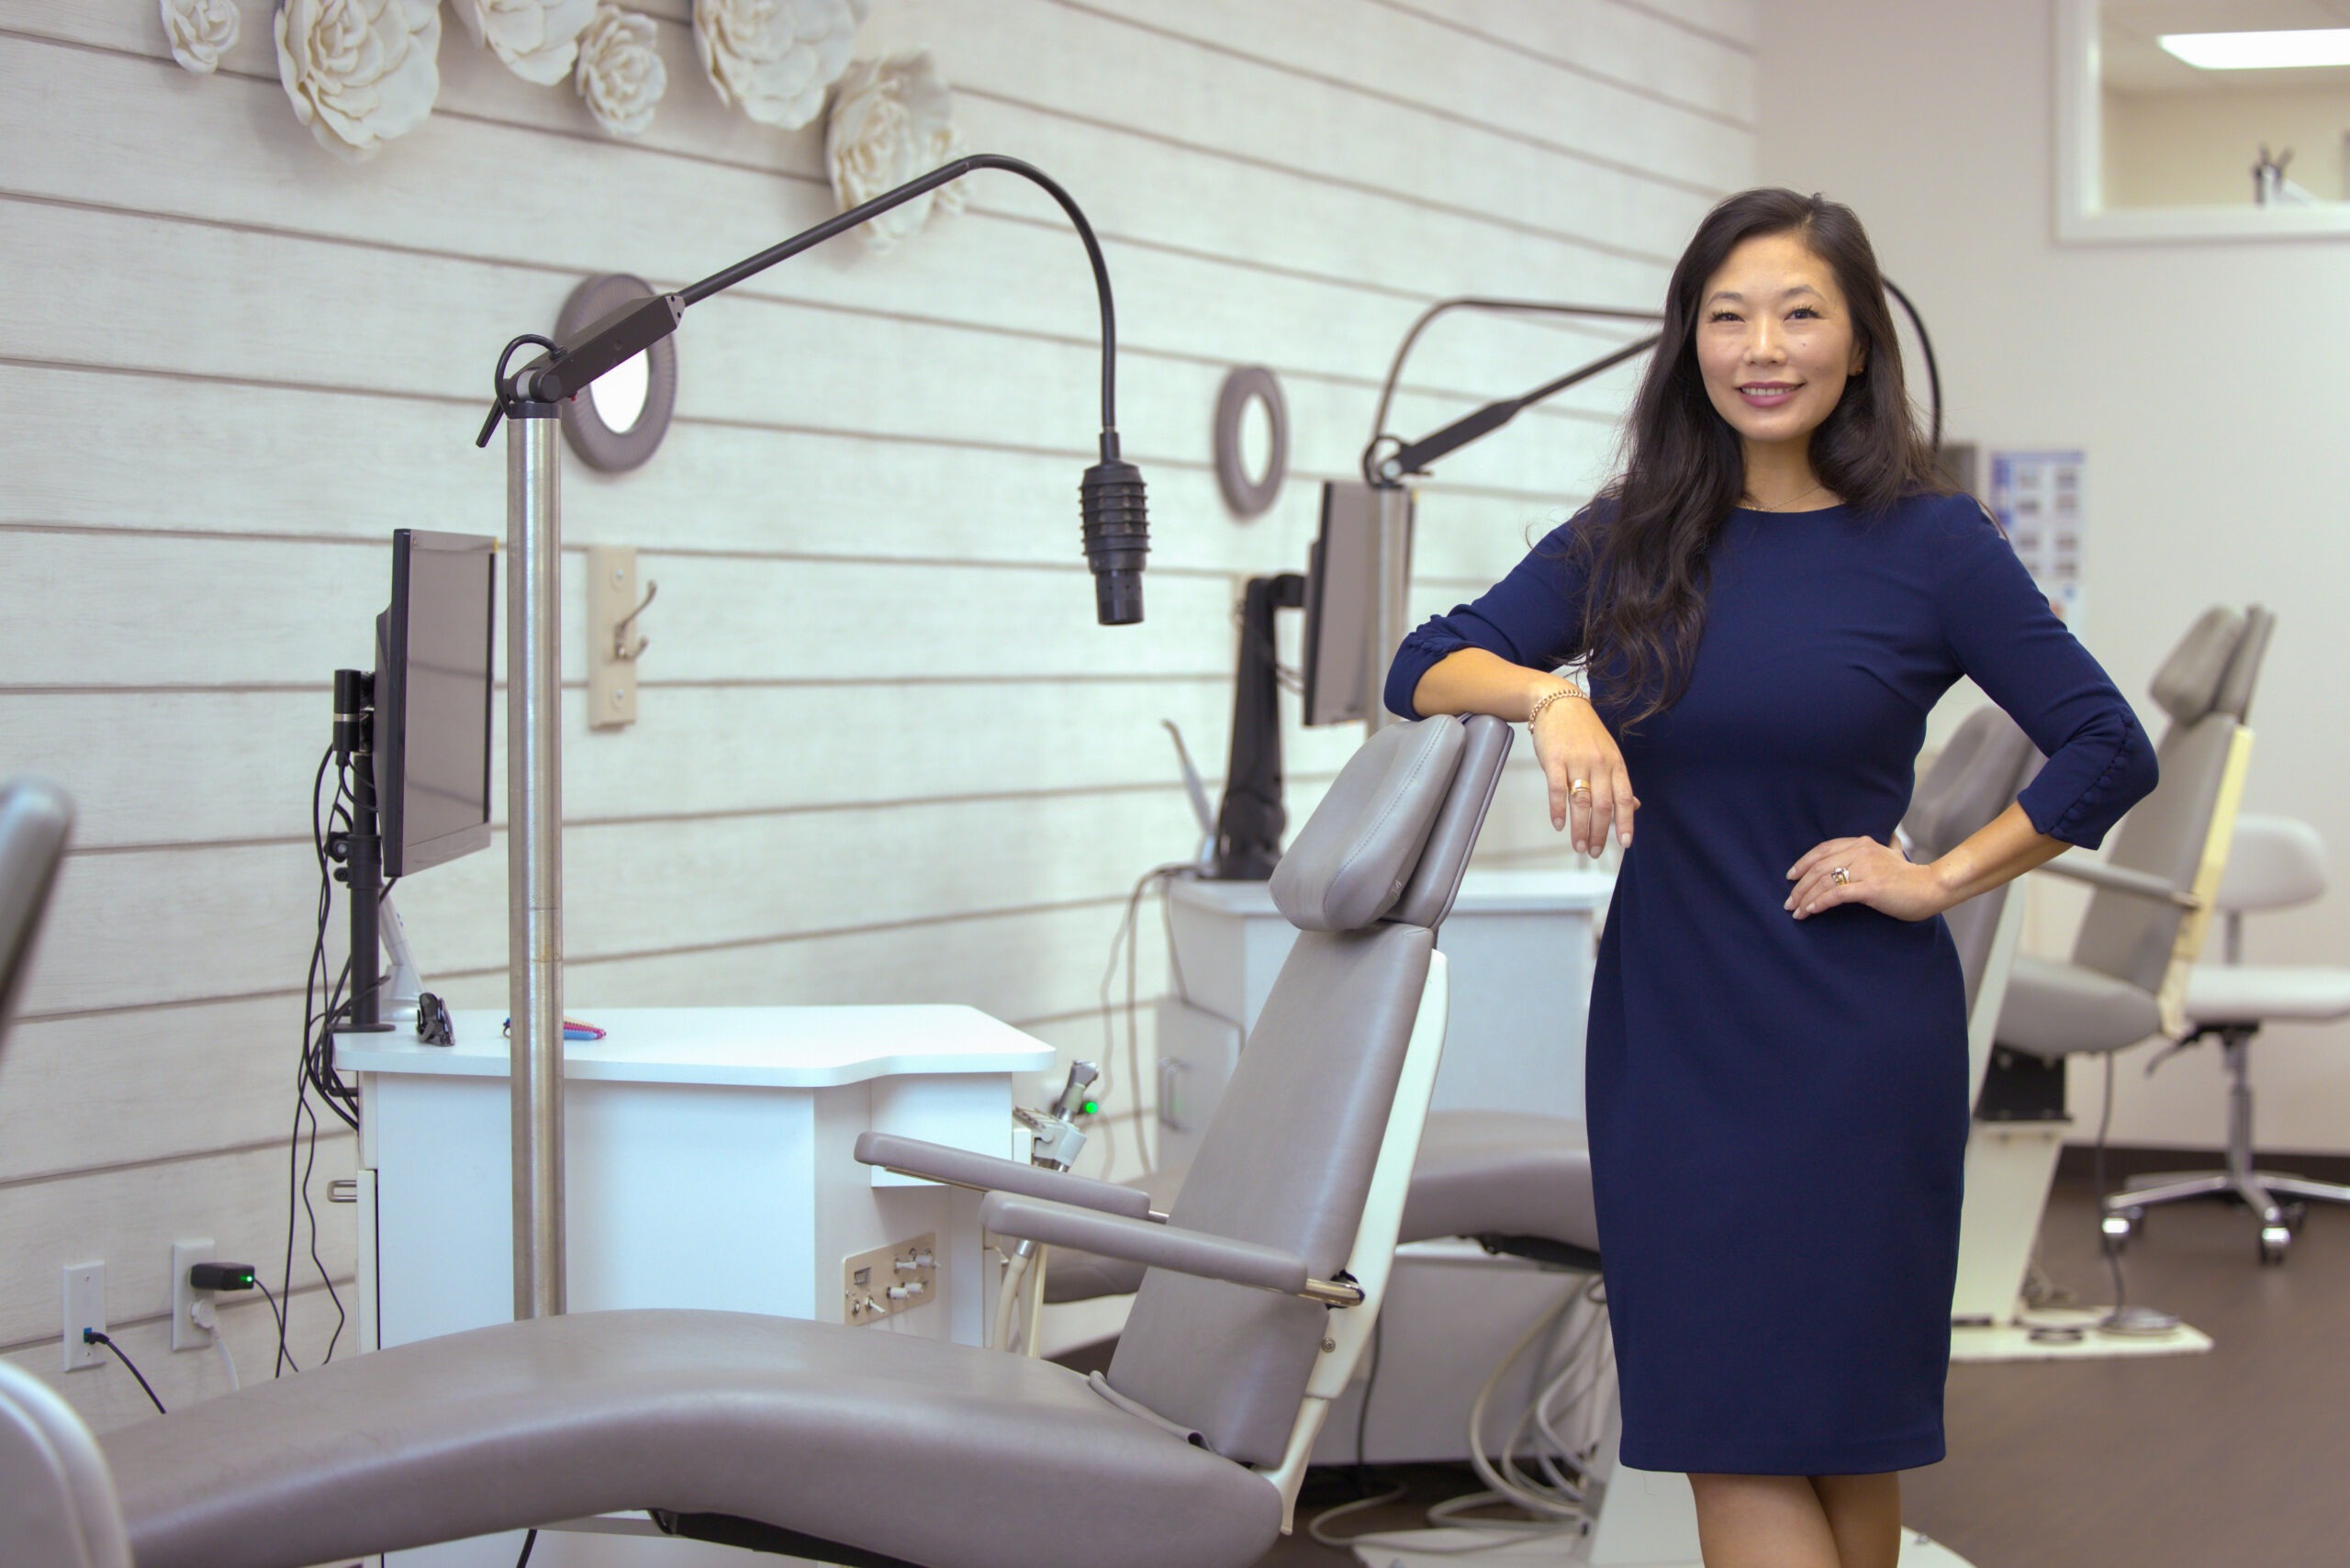 did you know that another significant aspect of your orthodontic and dental health and treatment comes down to your gums? It’s true! In some circumstances, Dr. Vo may recommend a procedure known as gum contouring.